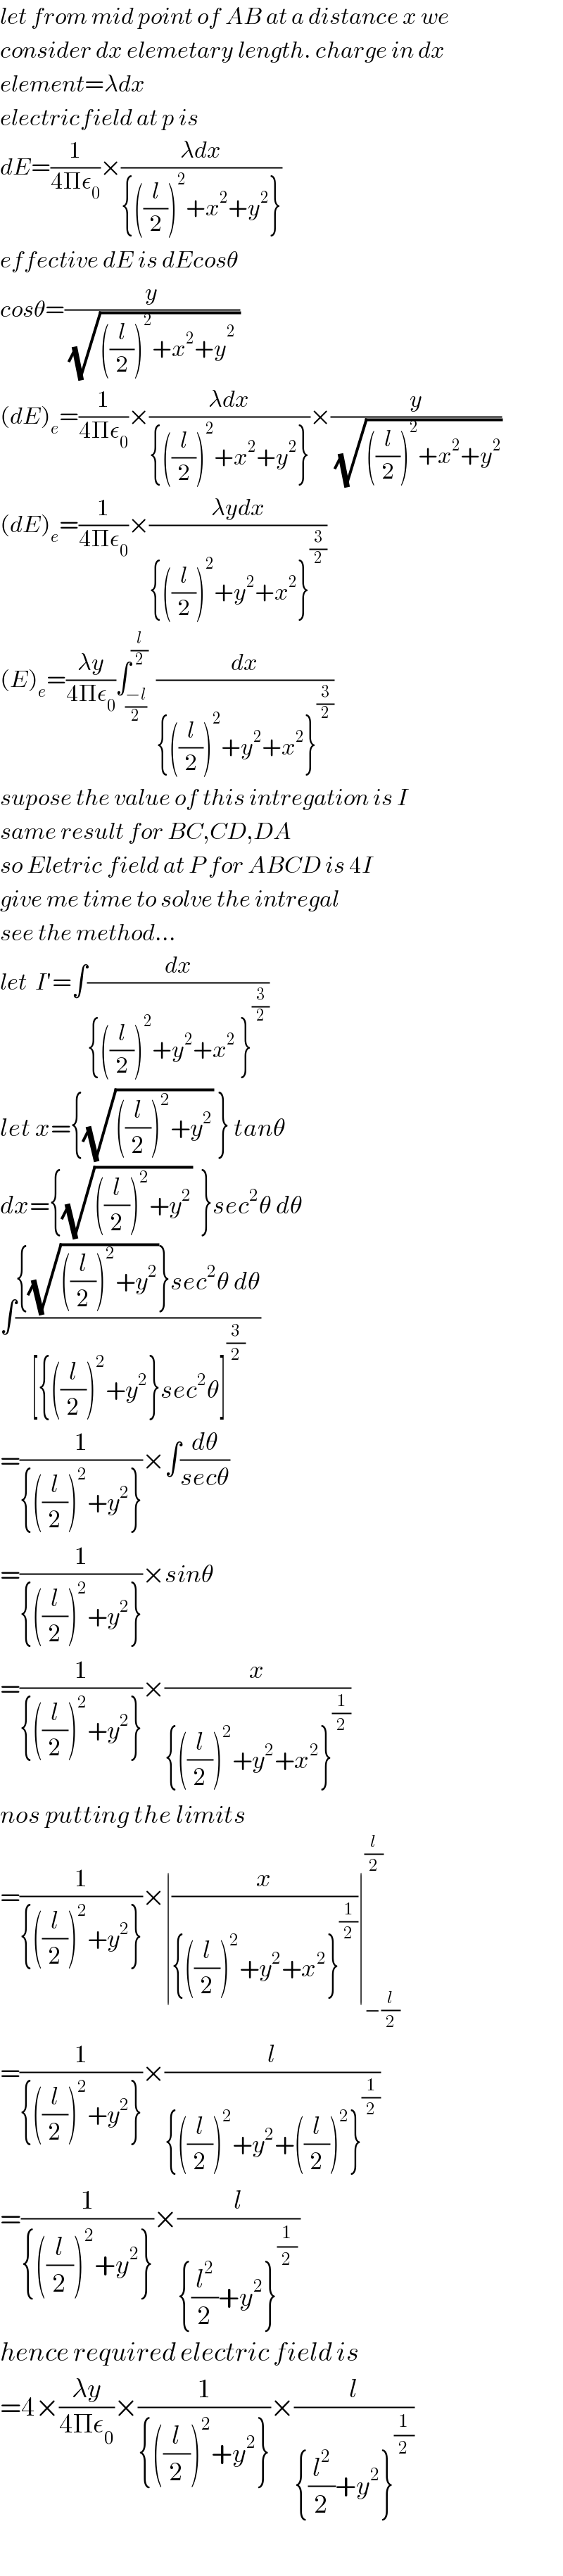 let from mid point of AB at a distance x we  consider dx elemetary length. charge in dx  element=λdx  electricfield at p is  dE=(1/(4Πε_0 ))×((λdx)/({((l/2))^2 +x^2 +y^2 }))  effective dE is dEcosθ  cosθ=(y/(√(((l/2))^2 +x^2 +y^(2 _  ) )))  (dE)_e =(1/(4Πε_0 ))×((λdx)/({((l/2))^2 +x^2 +y^2 }))×(y/(√(((l/2))^2 +x^2 +y^2 )))  (dE)_e =(1/(4Πε_0 ))×((λydx)/({((l/2))^2 +y^2 +x^2 }^(3/2) ))  (E)_e =((λy)/(4Πε_0 ))∫_((−l)/2) ^(l/2)  (dx/({((l/2))^2 +y^2 +x^2 }^(3/2) ))  supose the value of this intregation is I  same result for BC,CD,DA  so Eletric field at P for ABCD is 4I  give me time to solve the intregal  see the method...  let  I′=∫(dx/({((l/2))^2 +y^2 +x^2  }^(3/2) ))  let x={(√(((l/2))^2 +y^2 )) } tanθ  dx={(√(((l/2))^2 +y^2 ))  }sec^2 θ dθ  ∫(({(√(((l/2))^2 +y^2 ))}sec^2 θ dθ)/([{((l/2))^2 +y^2 }sec^2 θ]^(3/2) ))  =(1/({((l/2))^2 +y^2 }))×∫(dθ/(secθ))  =(1/({((l/2))^2 +y^2 }))×sinθ  =(1/({((l/2))^2 +y^2 }))×(x/({((l/2))^2 +y^2 +x^2 }^(1/2) ))  nos putting the limits  =(1/({((l/2))^2 +y^2 }))×∣(x/({((l/2))^2 +y^2 +x^2 }^(1/2) ))∣_(−(l/2)) ^(l/2)   =(1/({((l/2))^2 +y^2 }))×(l/({((l/2))^2 +y^2 +((l/2))^2 }^(1/2) ))  =(1/({((l/2))^2 +y^2 }))×(l/({(l^2 /2)+y^2 }^((1/2) ) ))  hence required electric field is  =4×((λy)/(4Πε_0 ))×(1/({((l/2))^2 +y^2 }))×(l/({(l^2 /2)+y^2 }^(1/2) ))    